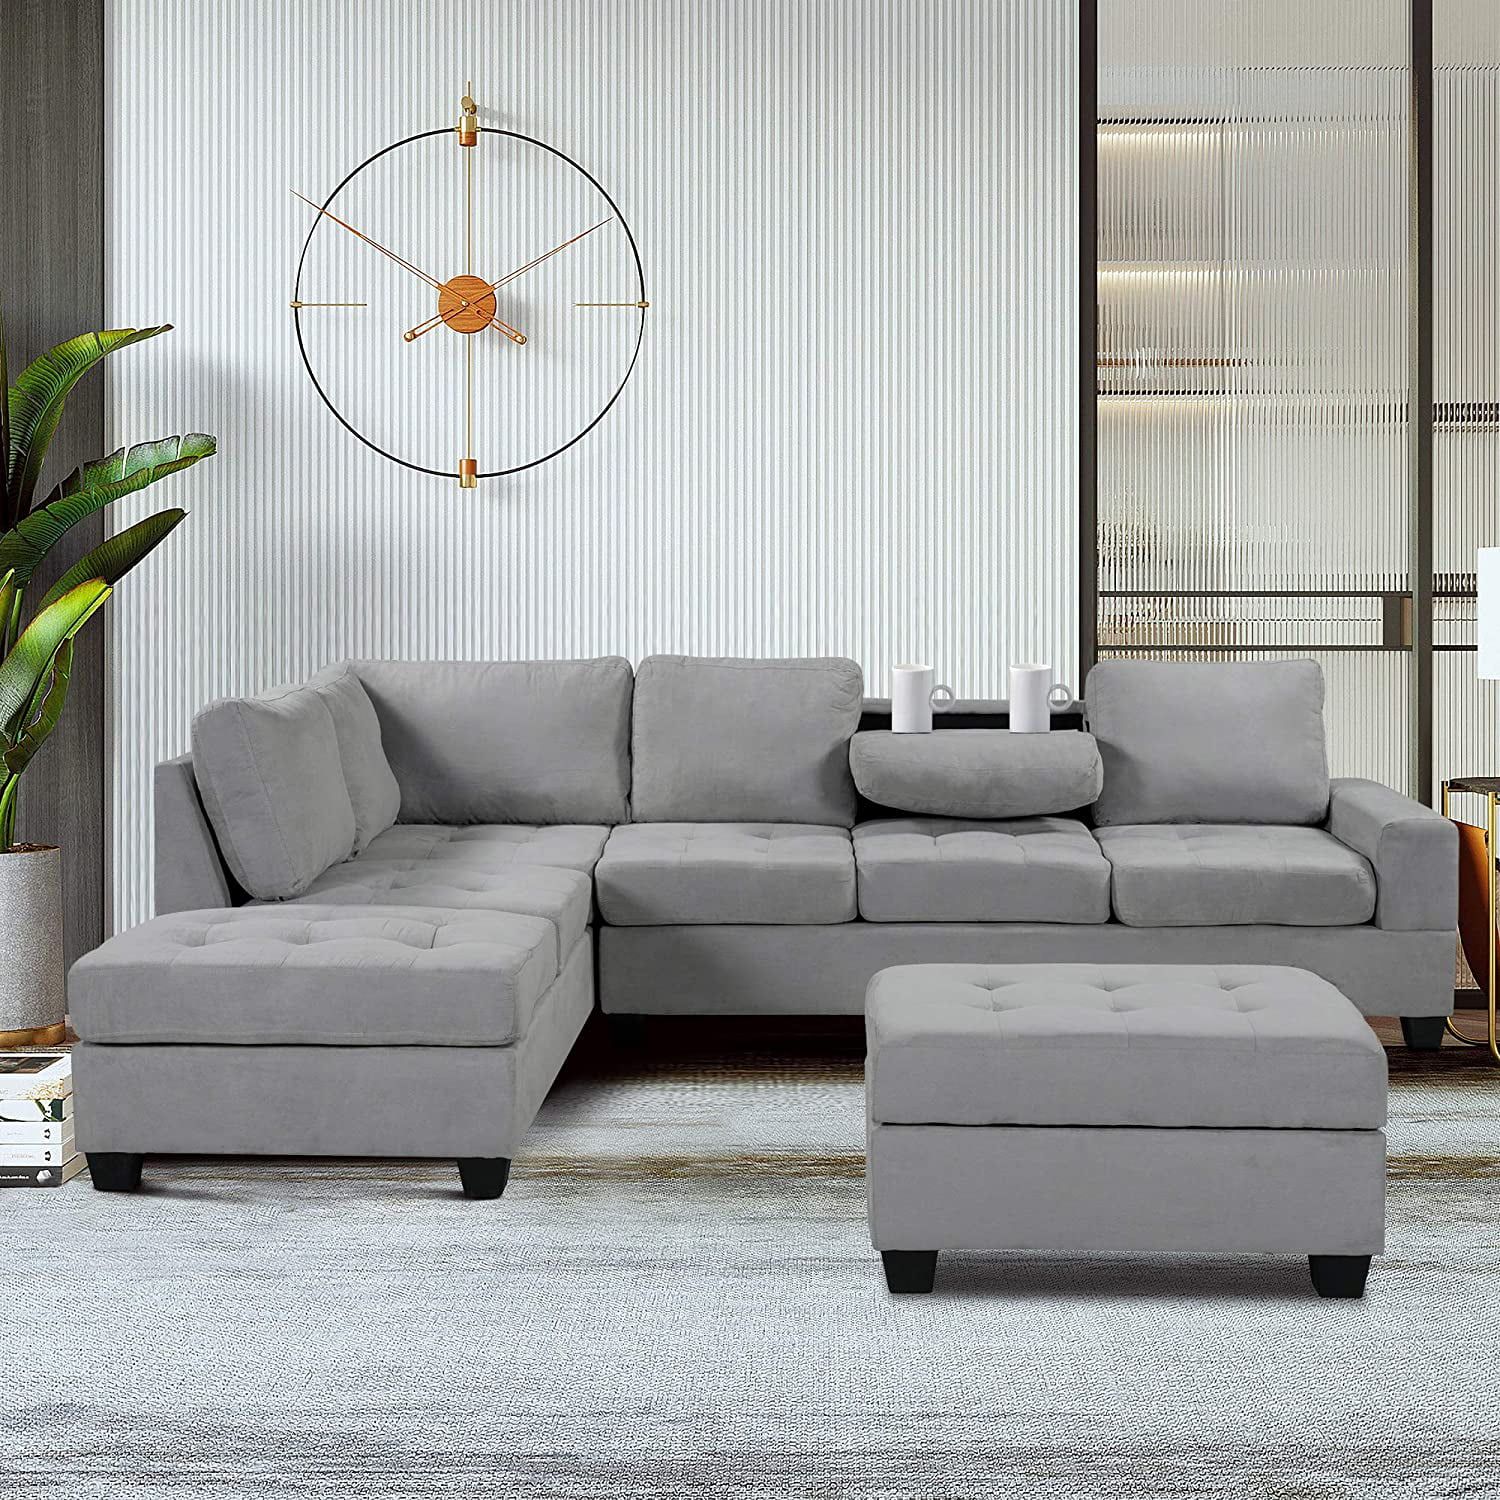 3 Piece Convertible Sectional Sofa L Shaped Couch With Reversible Within L Shape Couches With Reversible Chaises (Gallery 1 of 20)